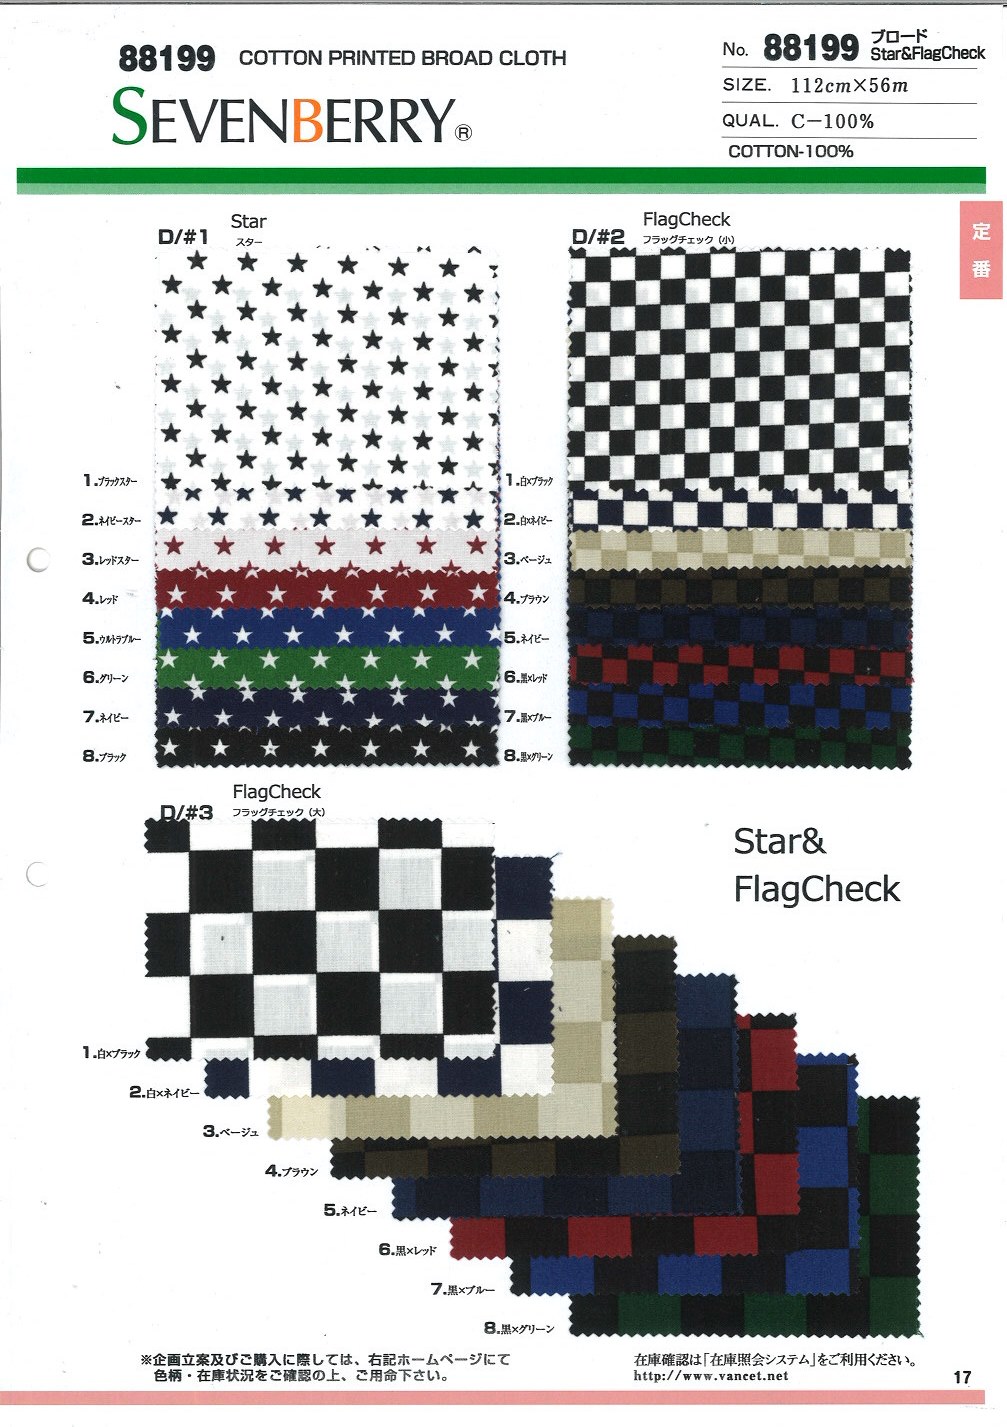 88199 Broadcloth Star/Flag Check Pattern[Textile / Fabric] VANCET